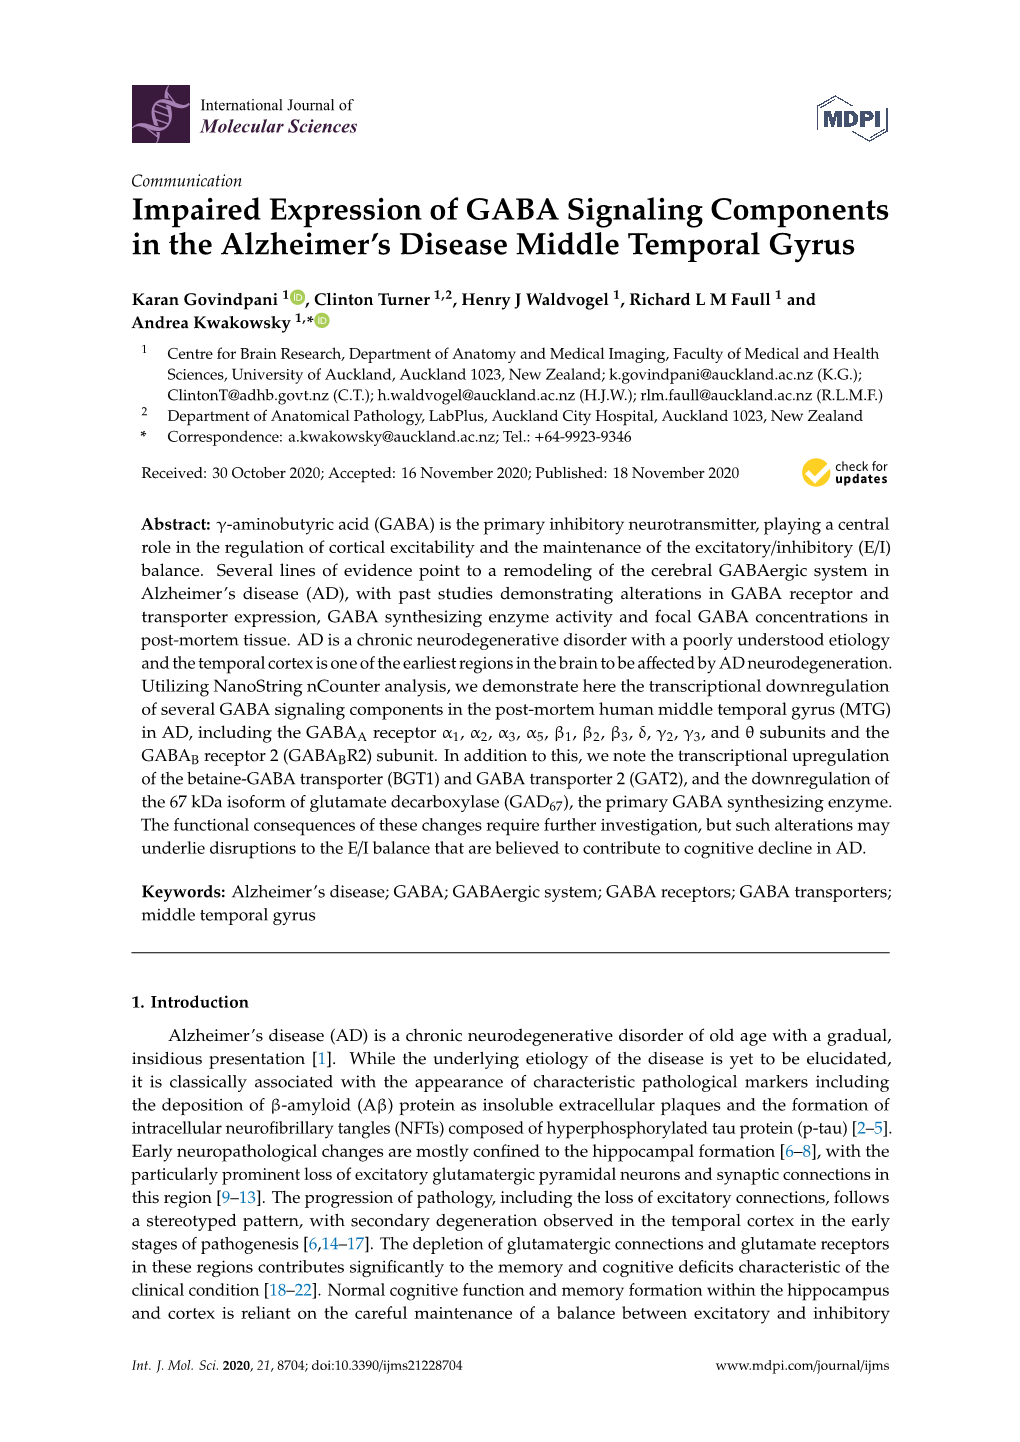 Impaired Expression of GABA Signaling Components in the Alzheimer’S Disease Middle Temporal Gyrus